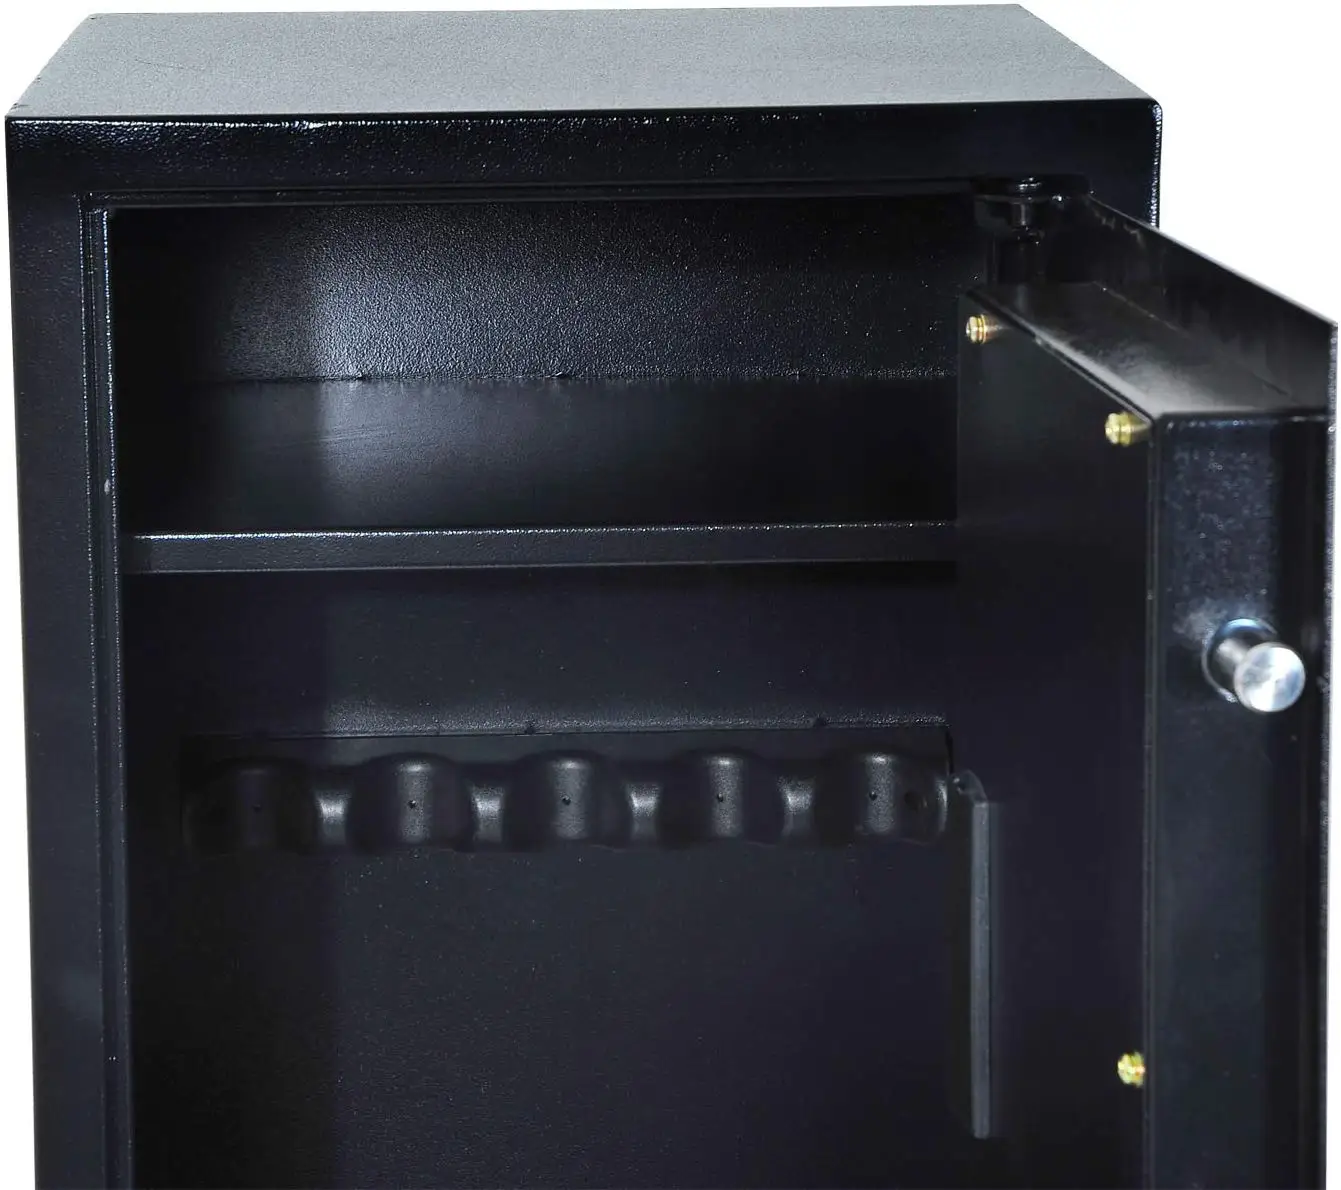 high quality strong wall mounted digital gun safe cabinet for sale